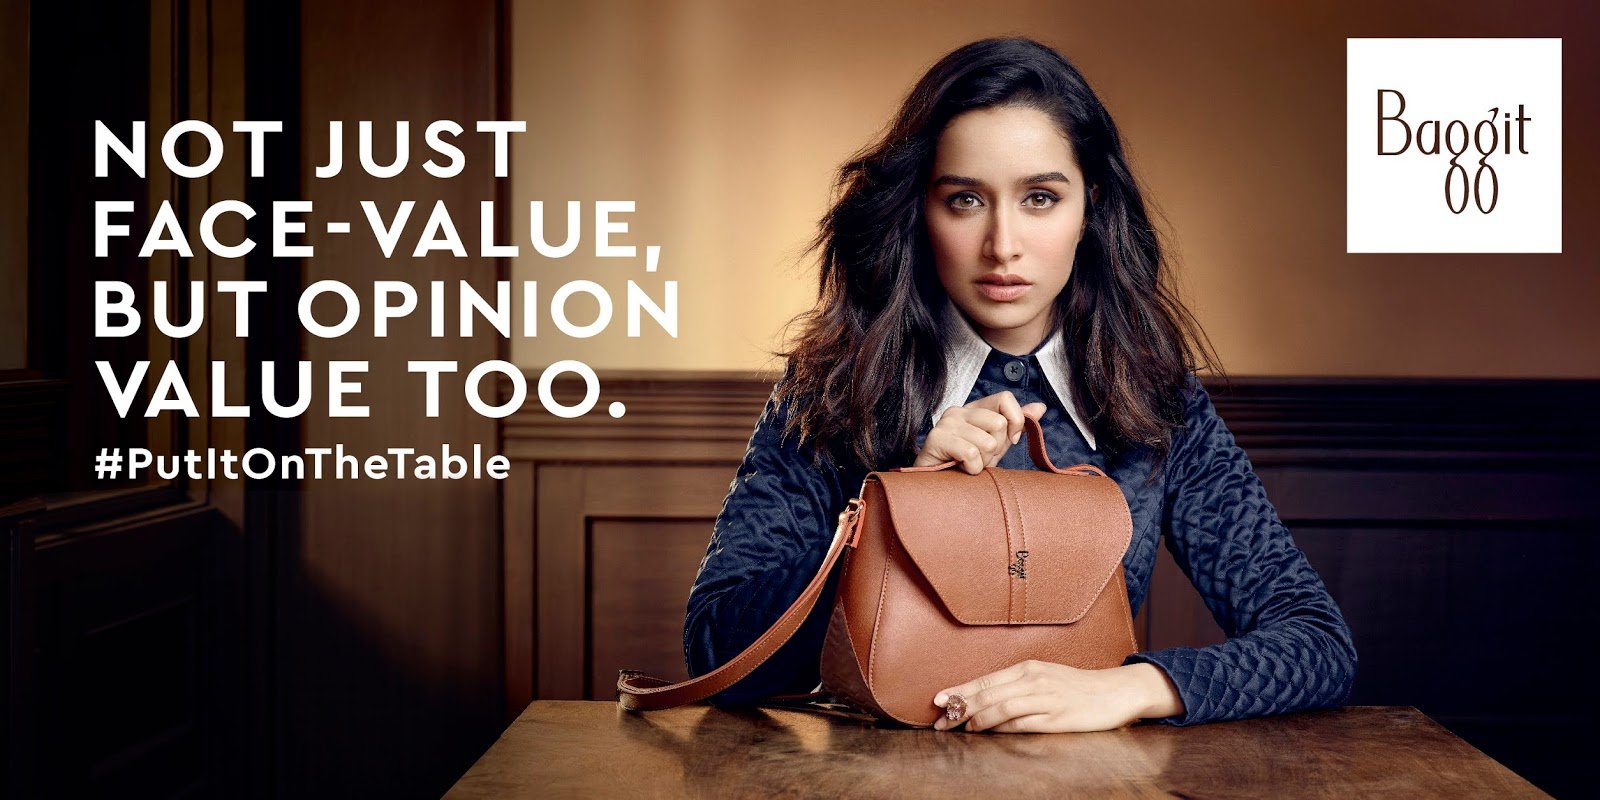 Baggit Launches Its New Campaign with Shraddha Kapoor 